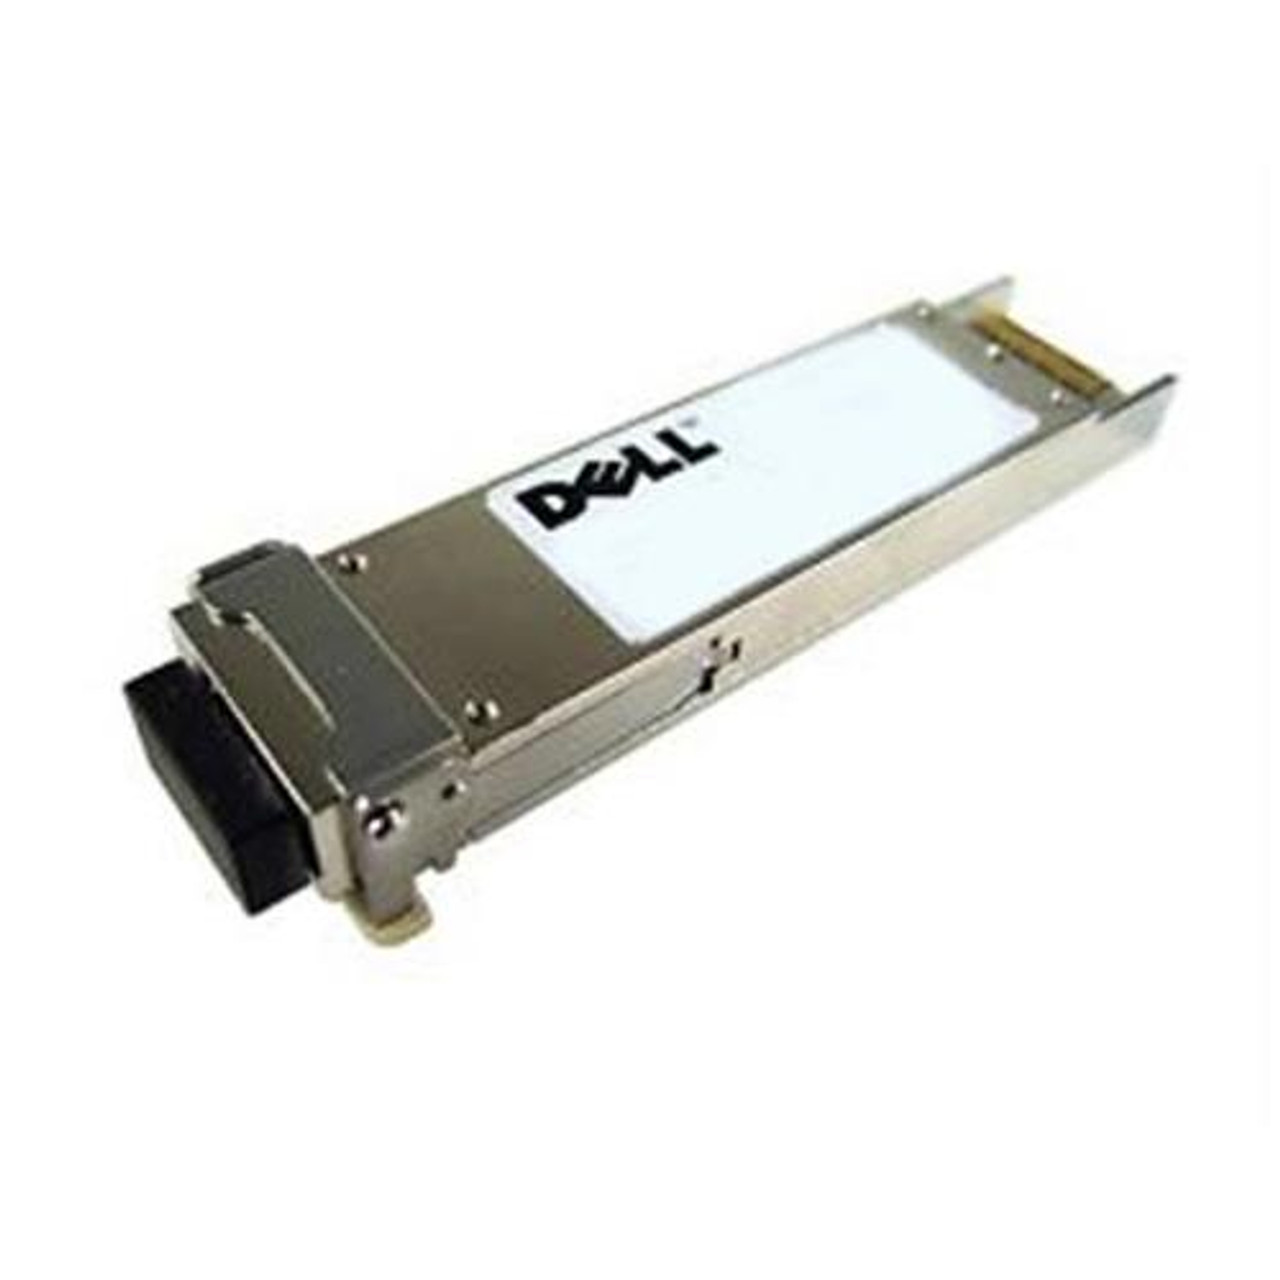 249507 Dell Edgeport 2 Usb To 2 Port Eia-232 Serial